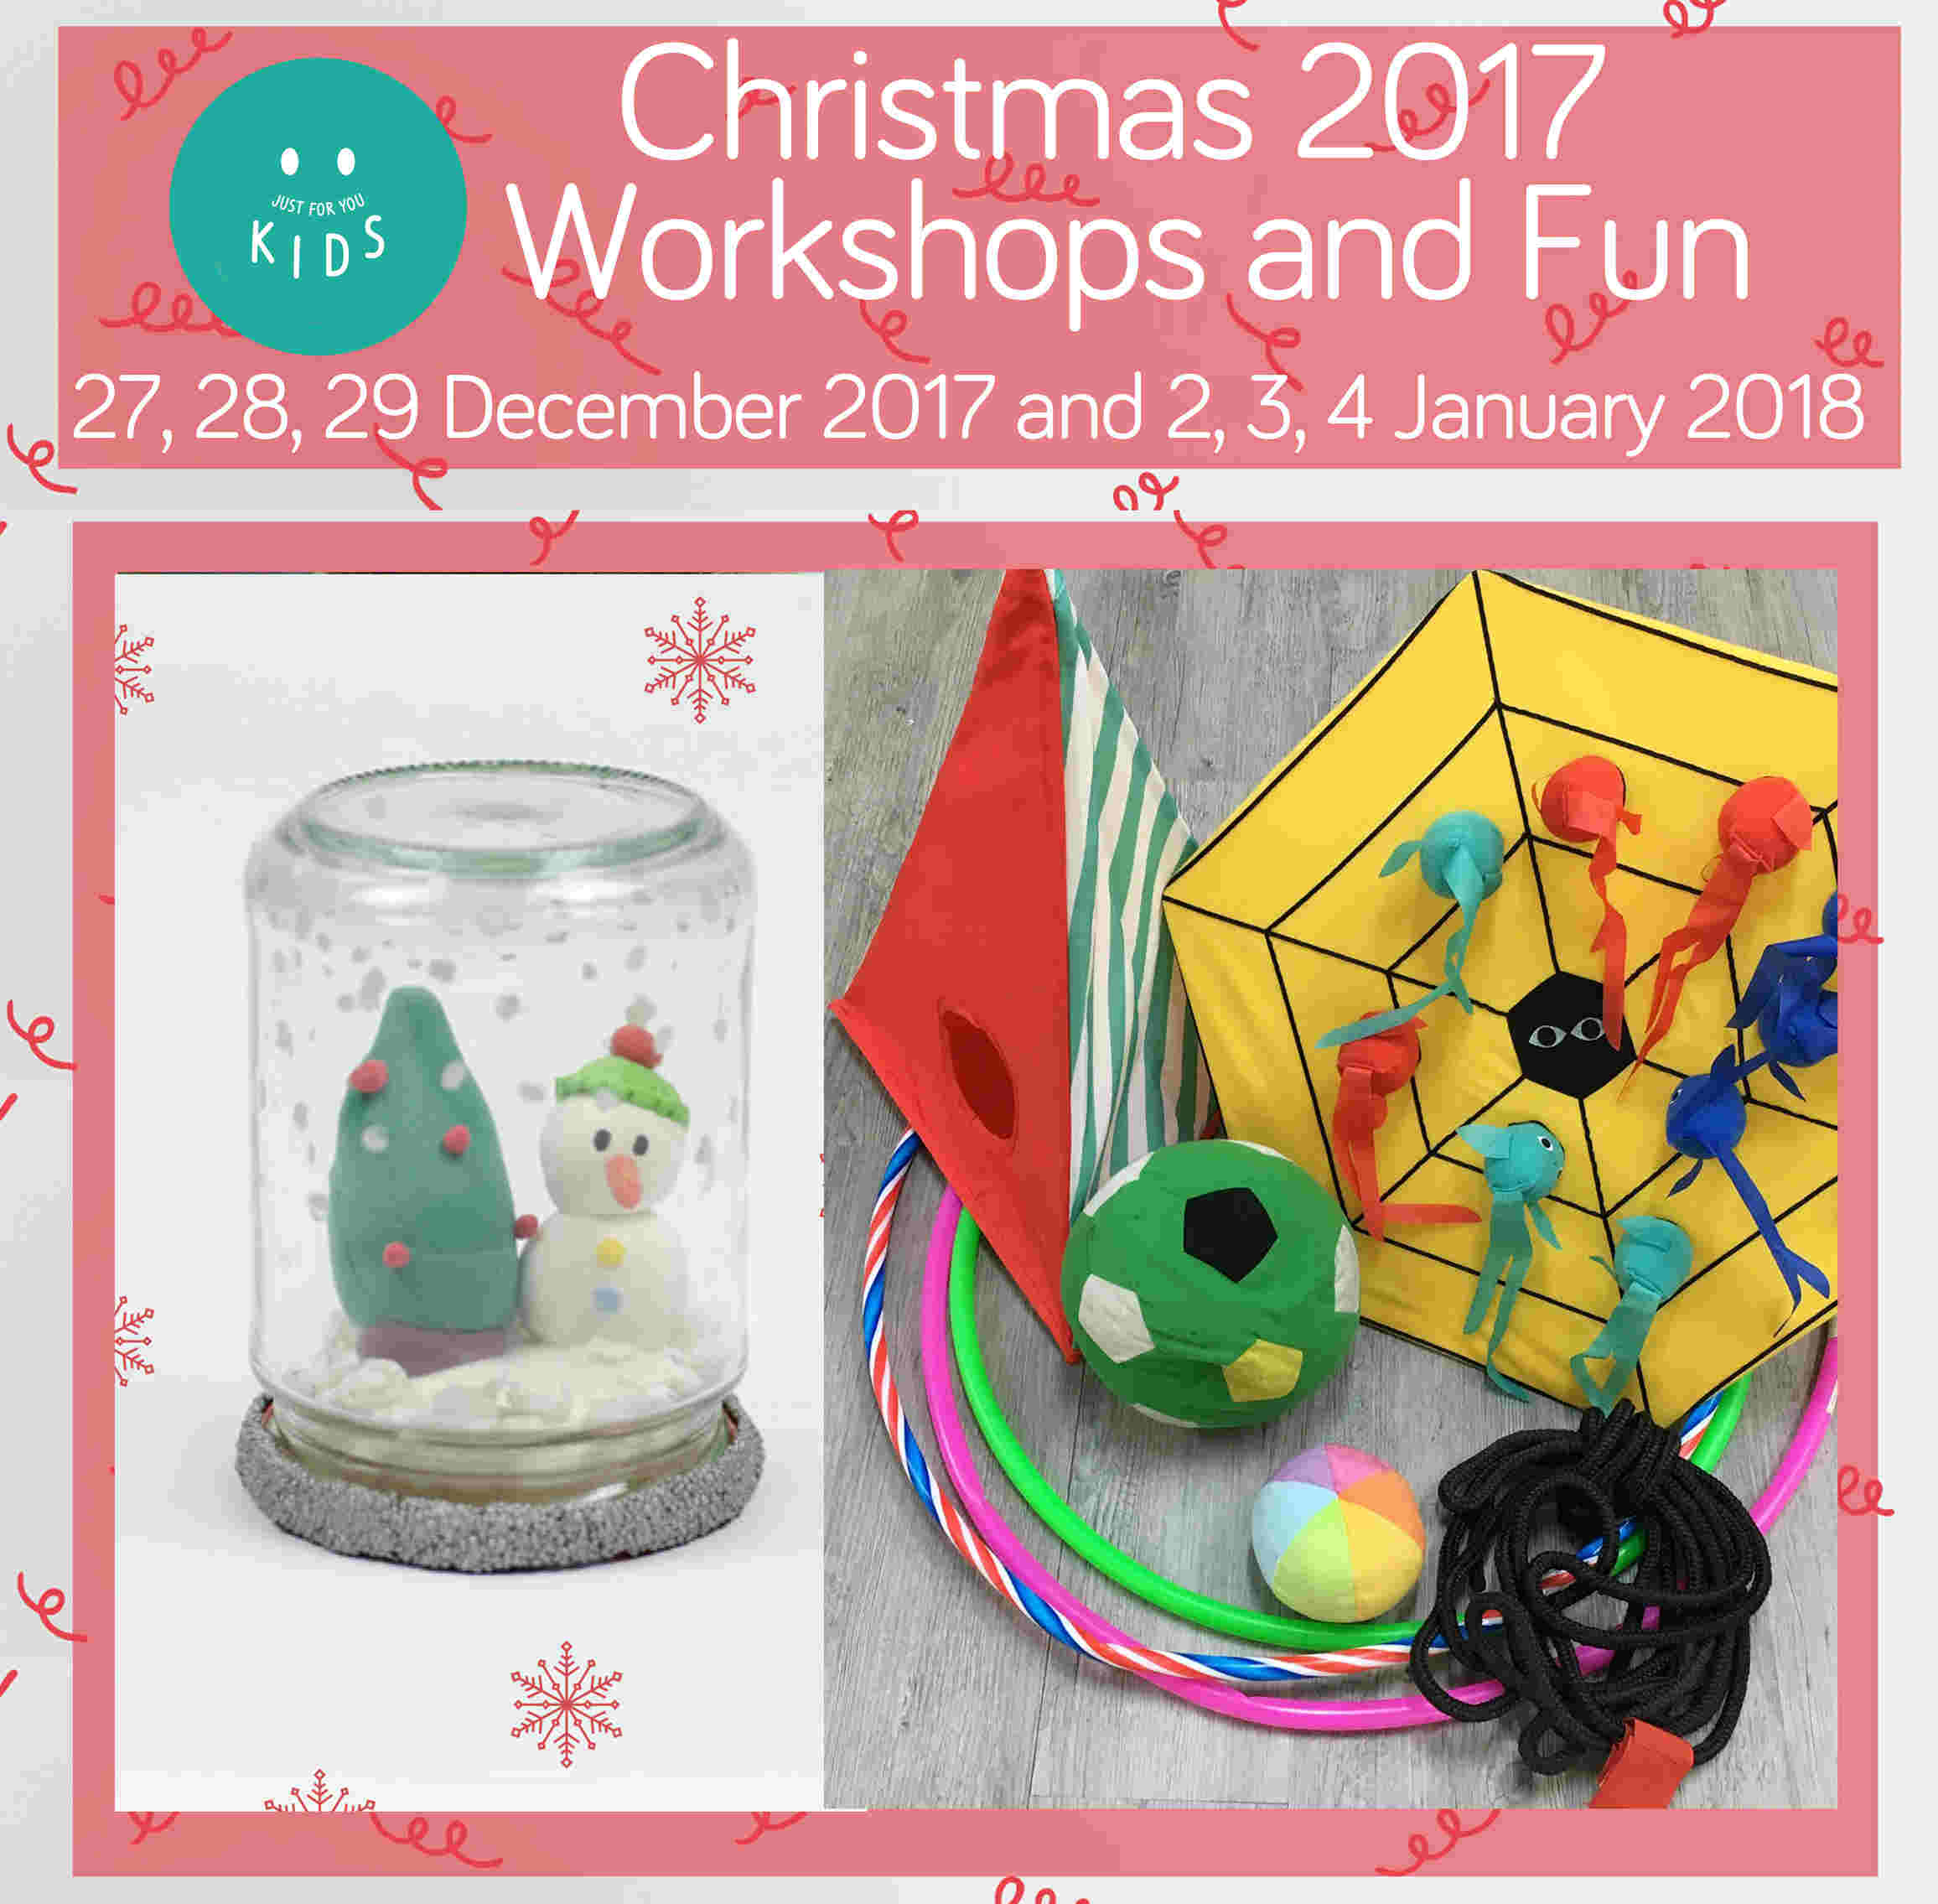 Christmas 2017 Workshops and Fun